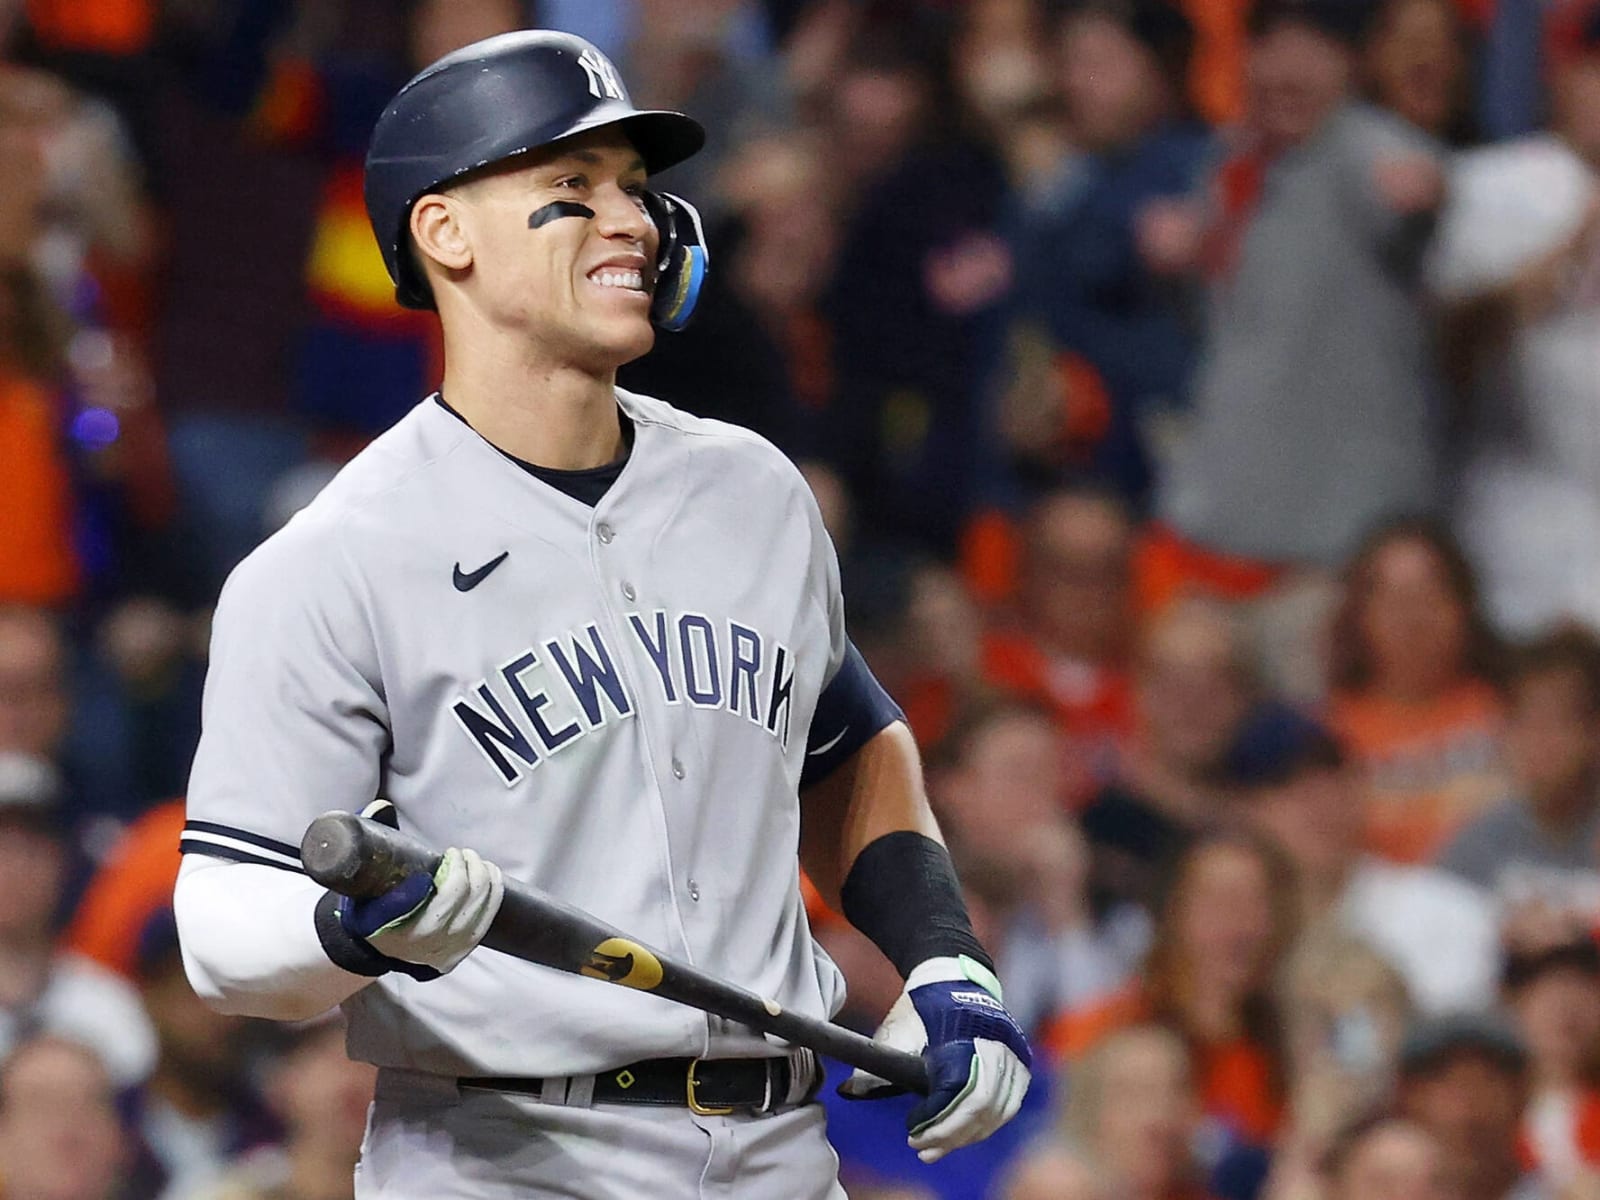 Jose Canseco tells Aaron Judge to leave the Yankees and 'dump' of New York  with it's 'awful' fans